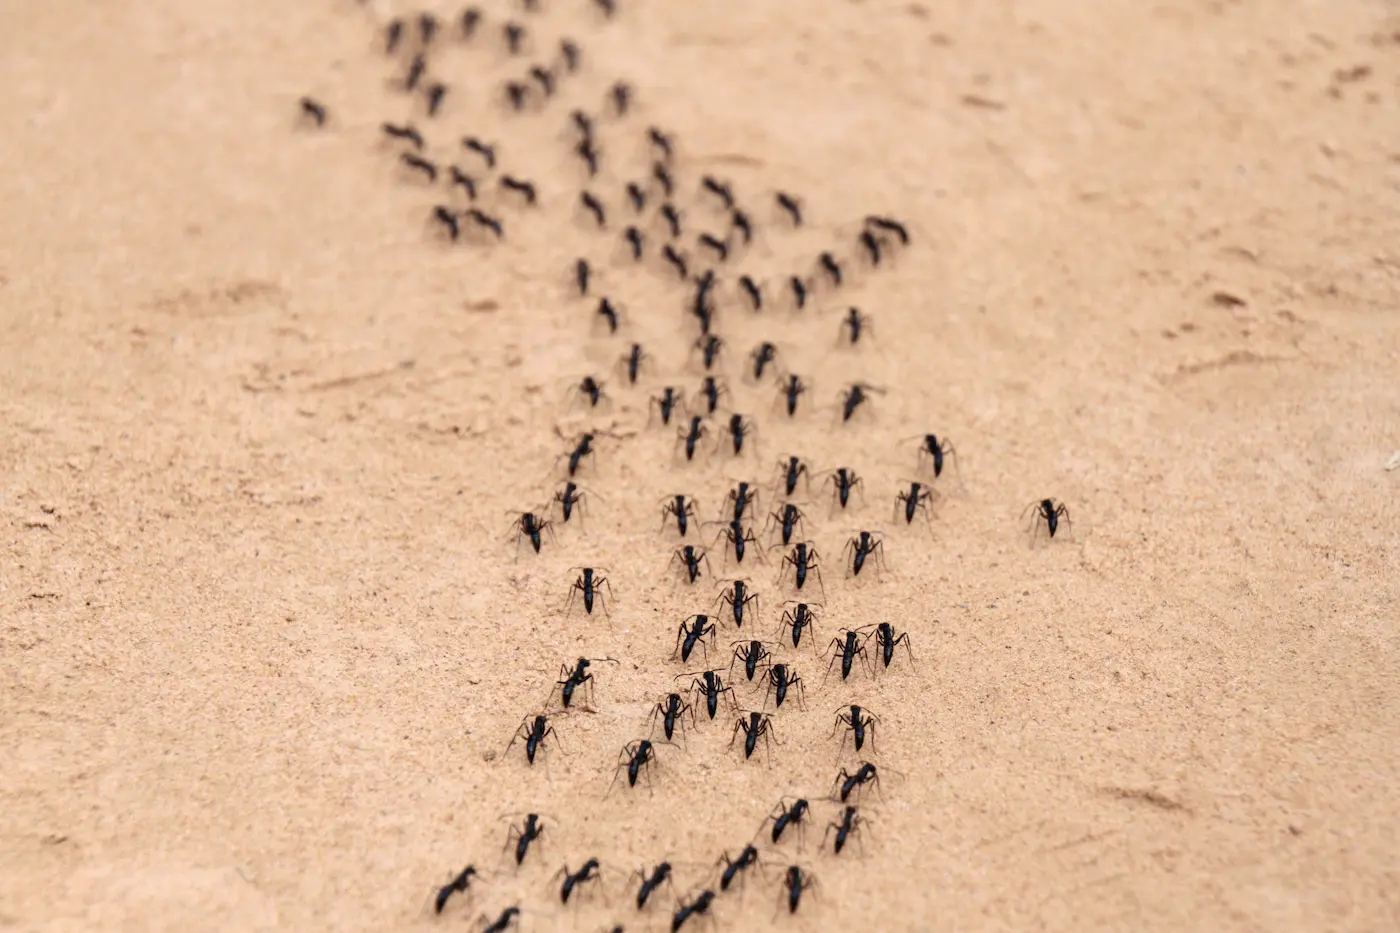 groups of ants along ground